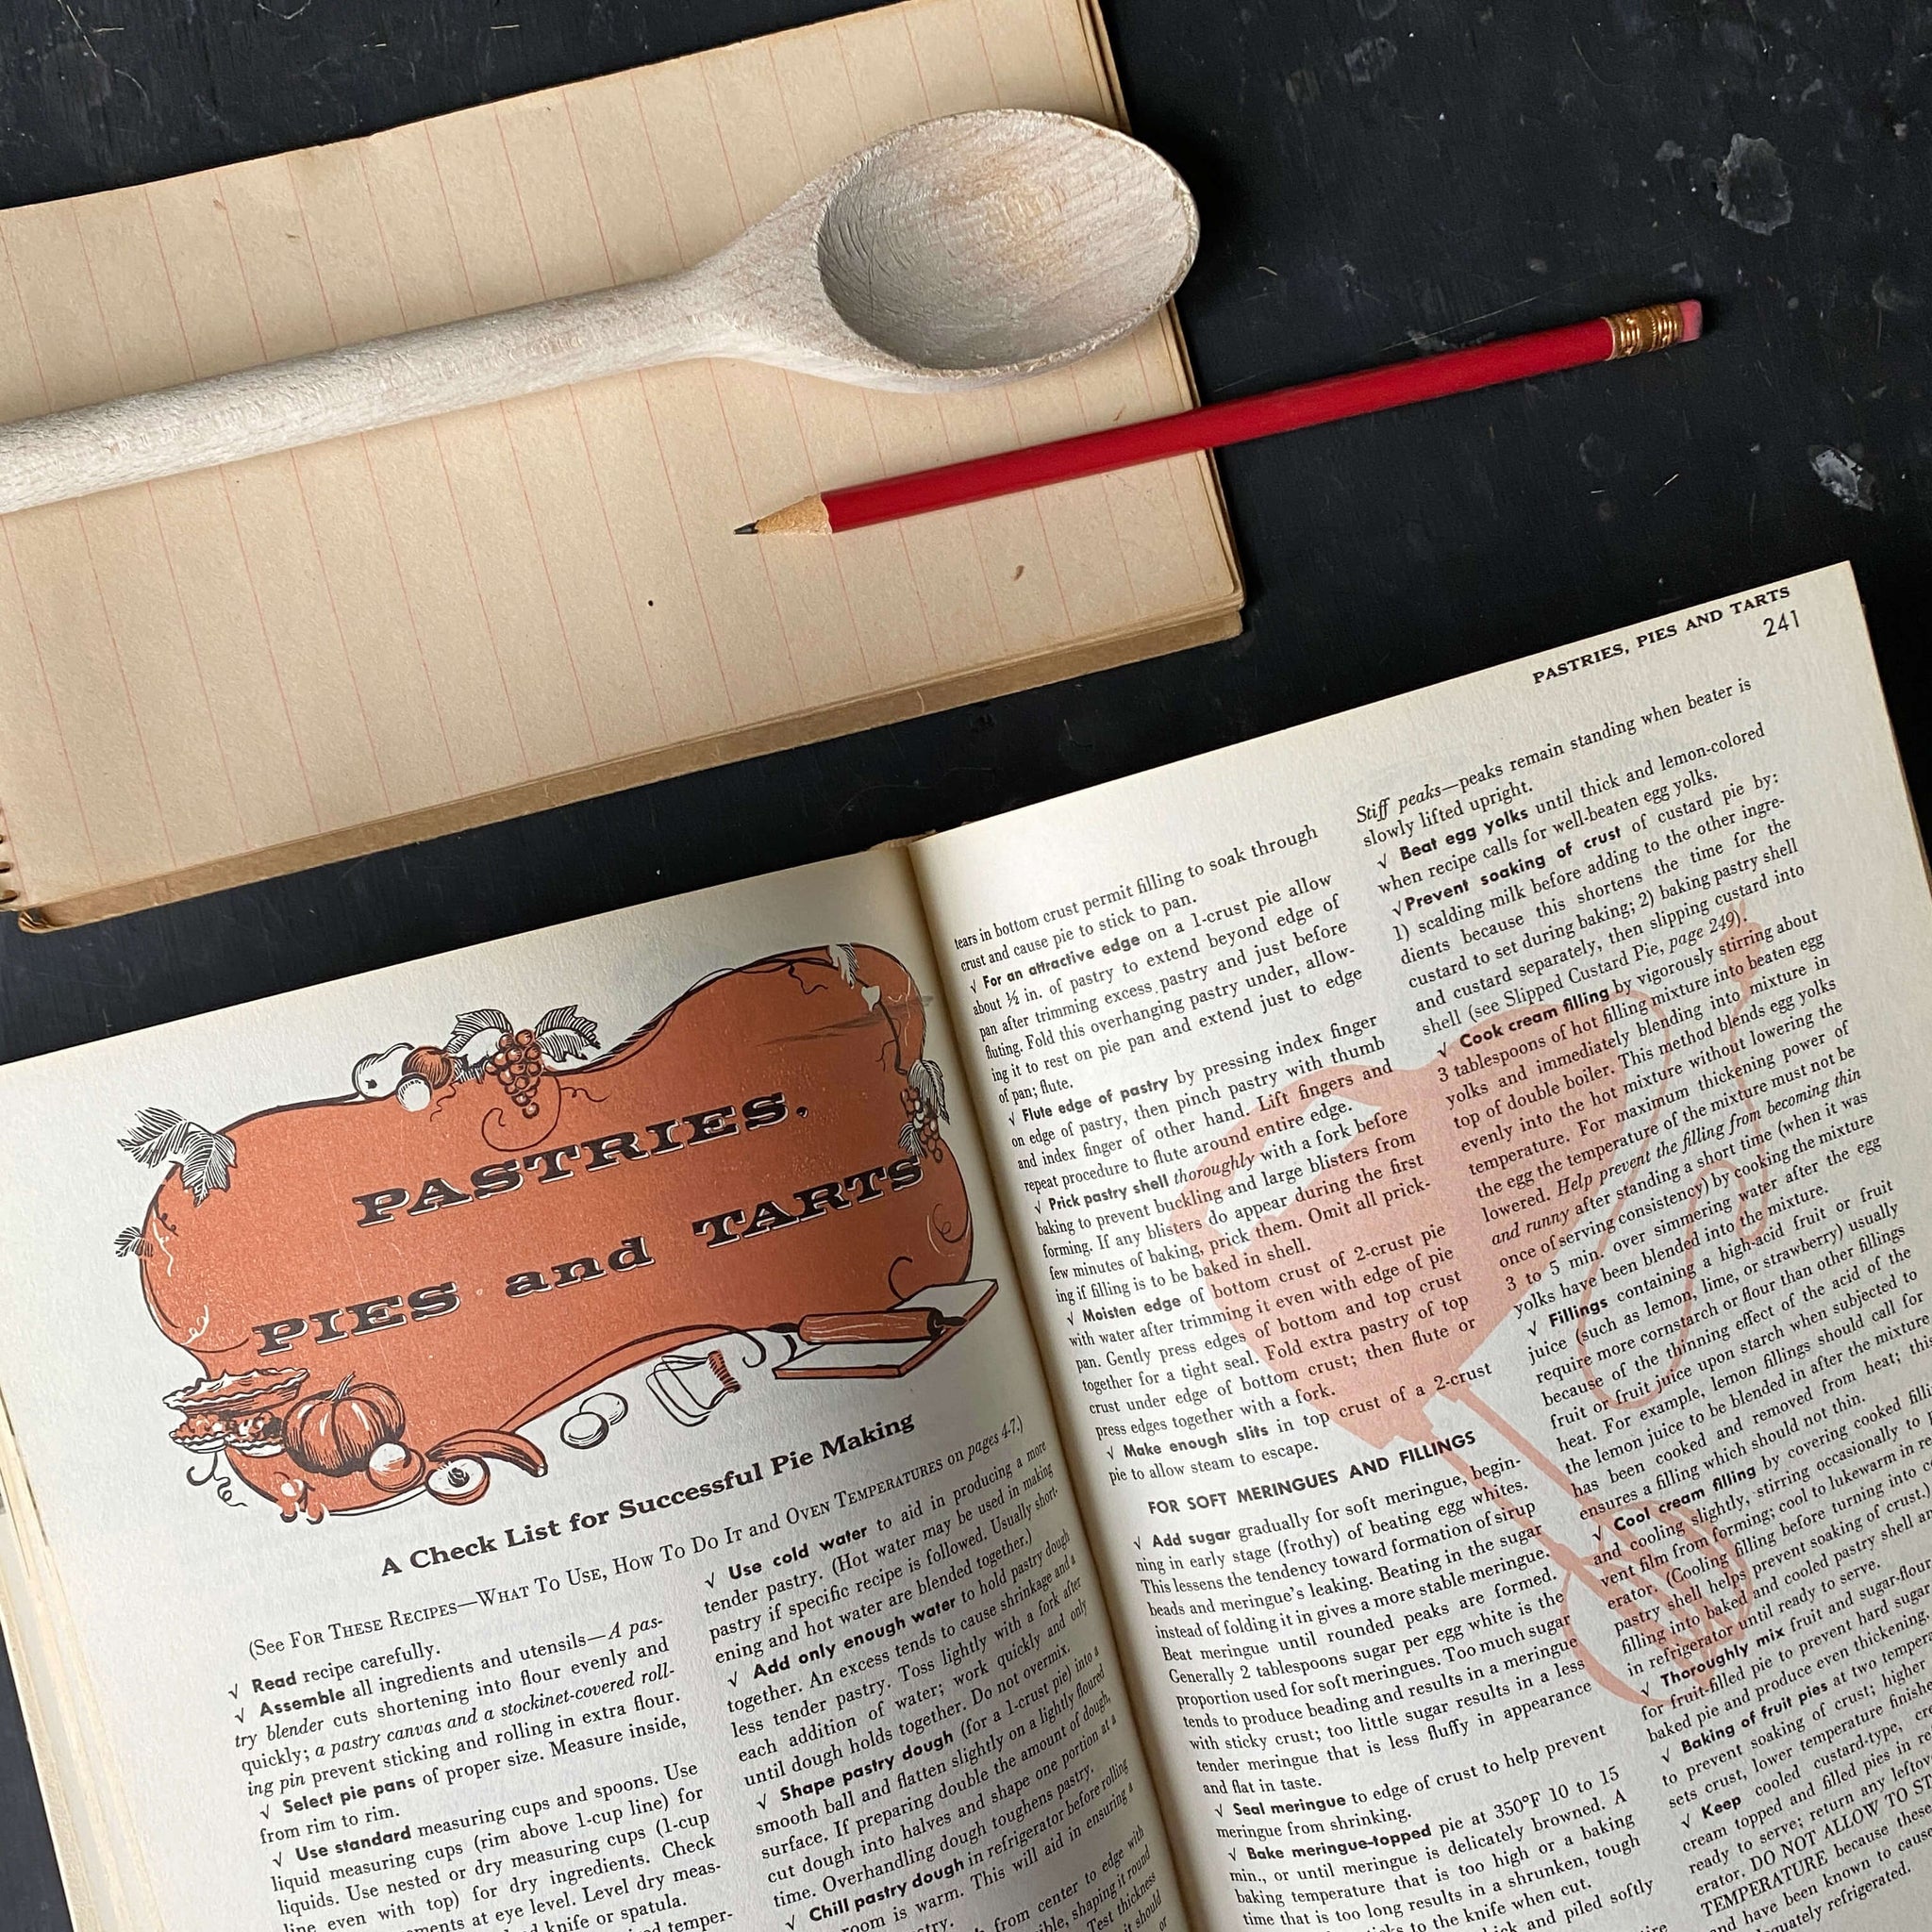 My Favorite Recipes by the Culinary Arts Institute - 1959 Edition